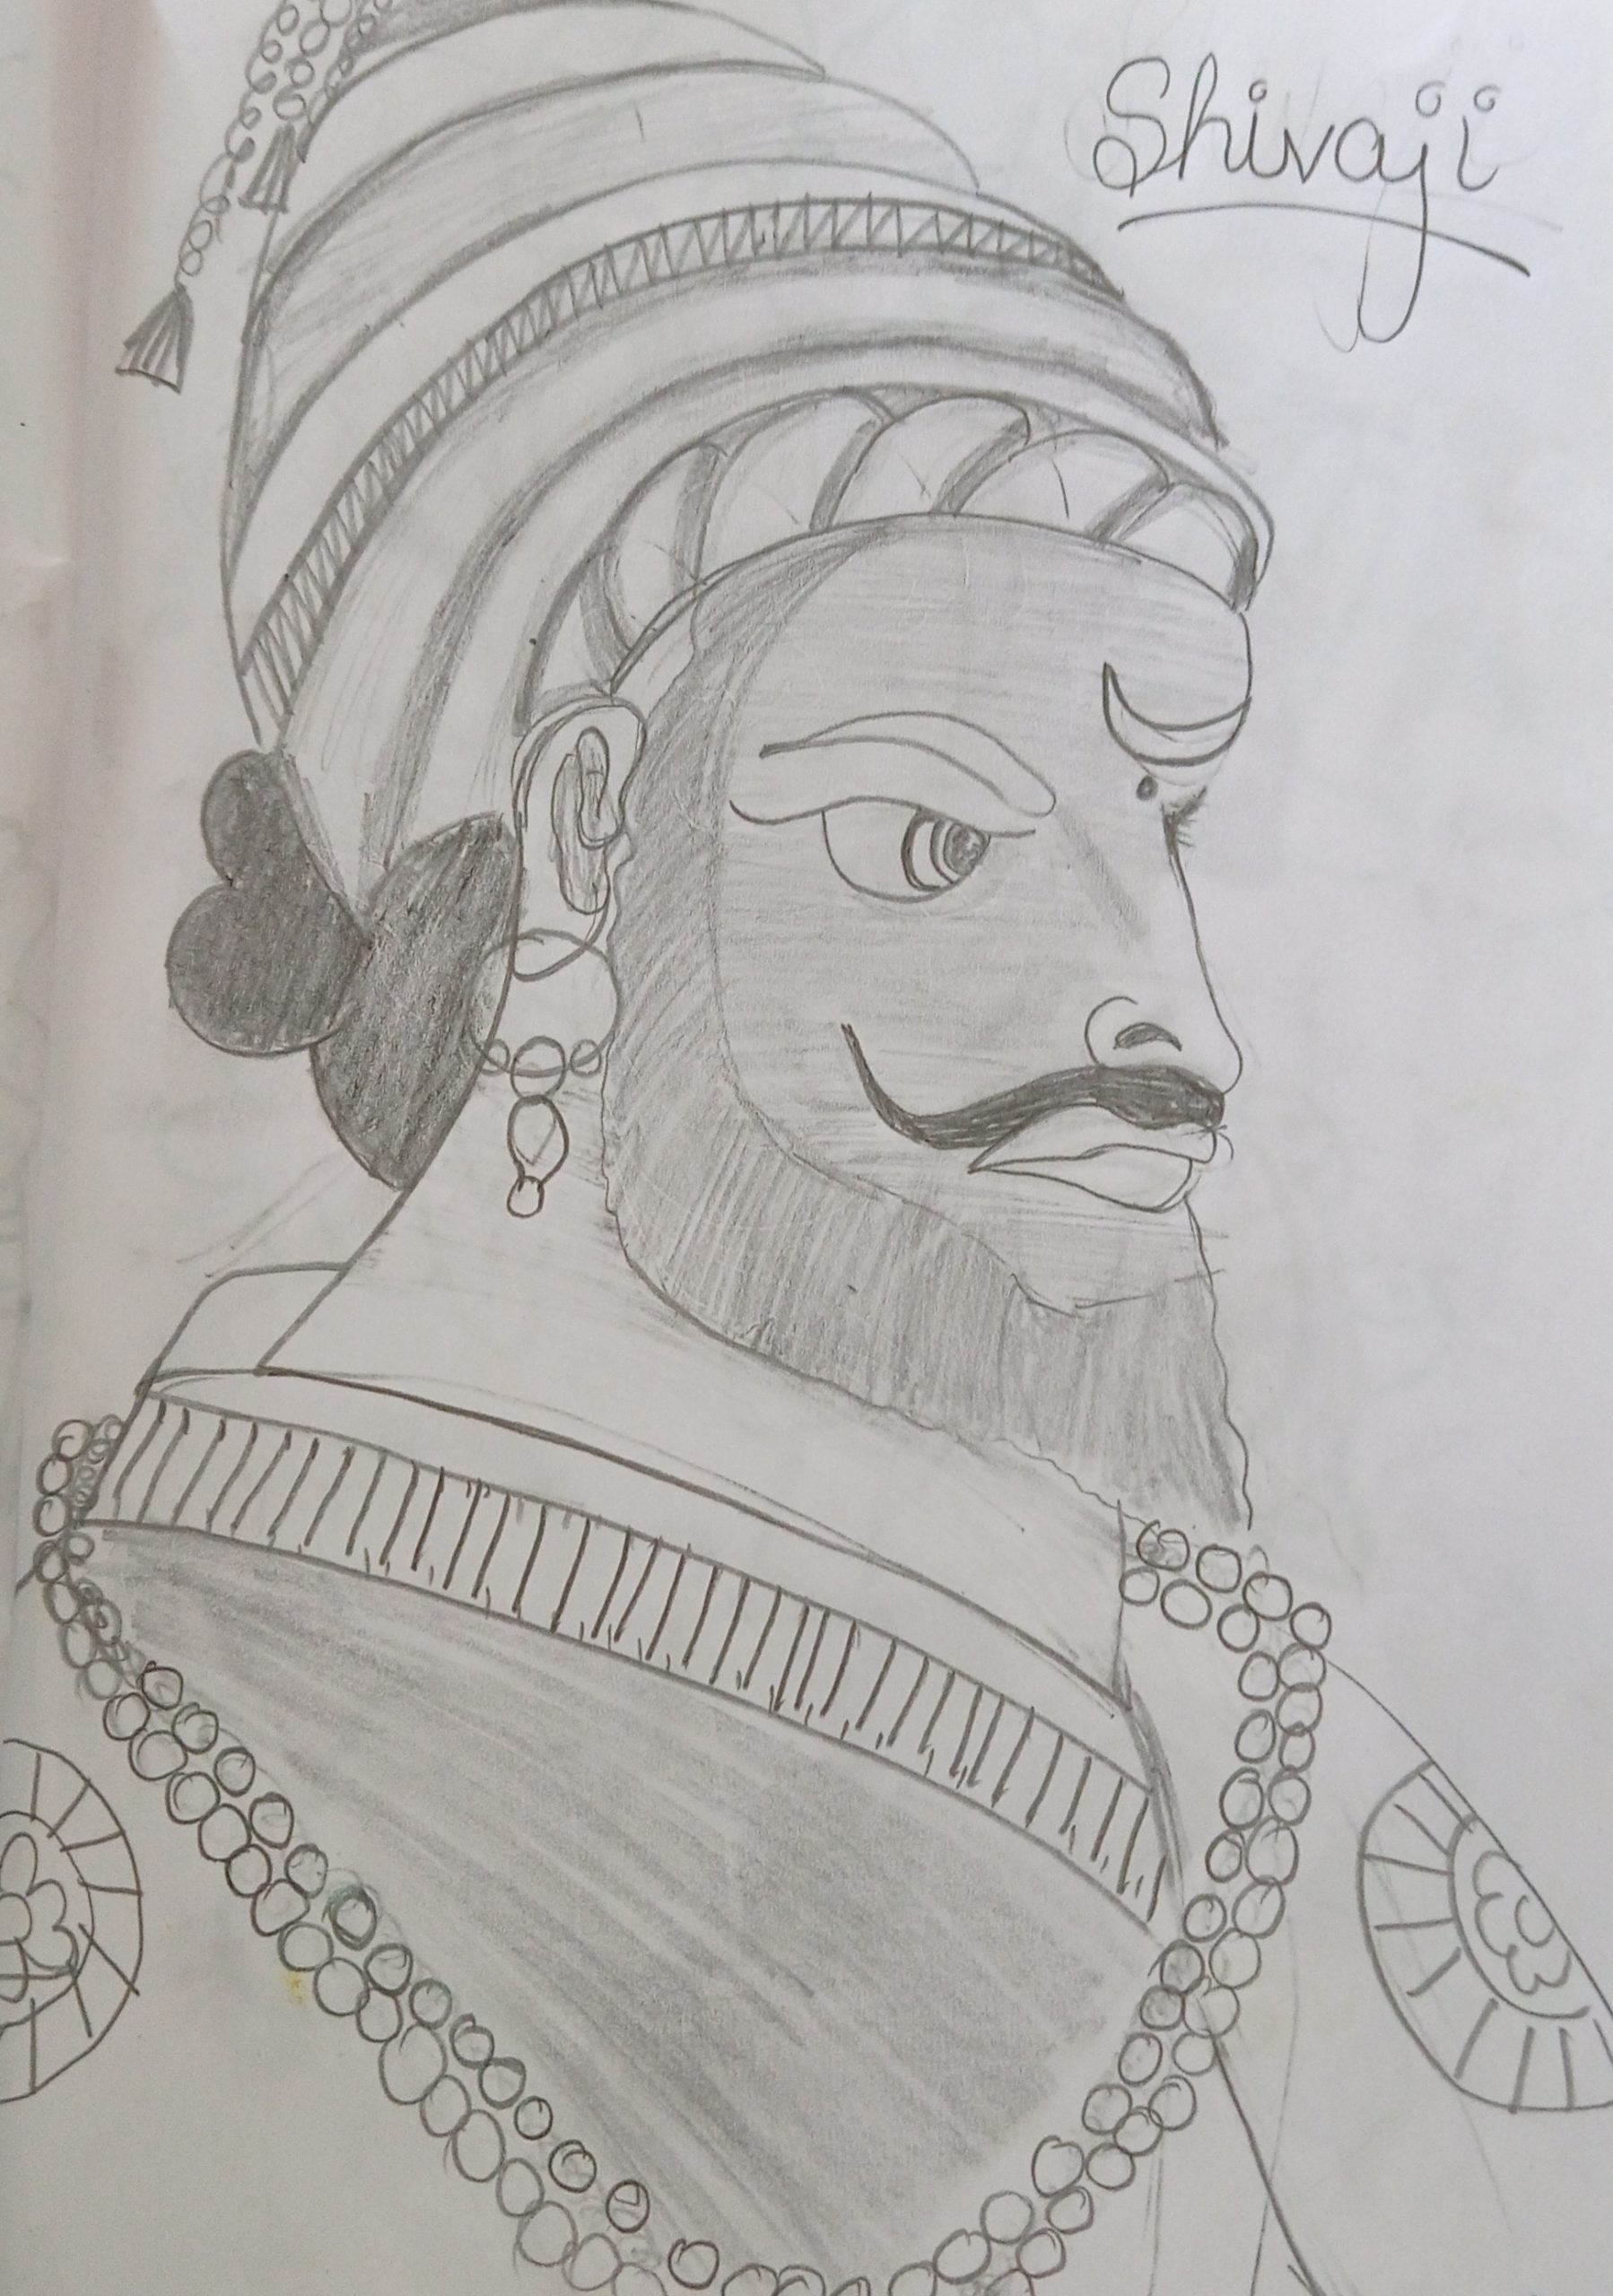 Rohan Khandekar on X Sketch of Chhatrapati Shivaji Maharaj Used 6B  amp HB pencil chhatrapatishivajimaharaj shivajimaharaj shiva  shivajimaharaj shivajiraje drawthisinyourstyle drawing  drawingsketches drawing sketch artcollective 